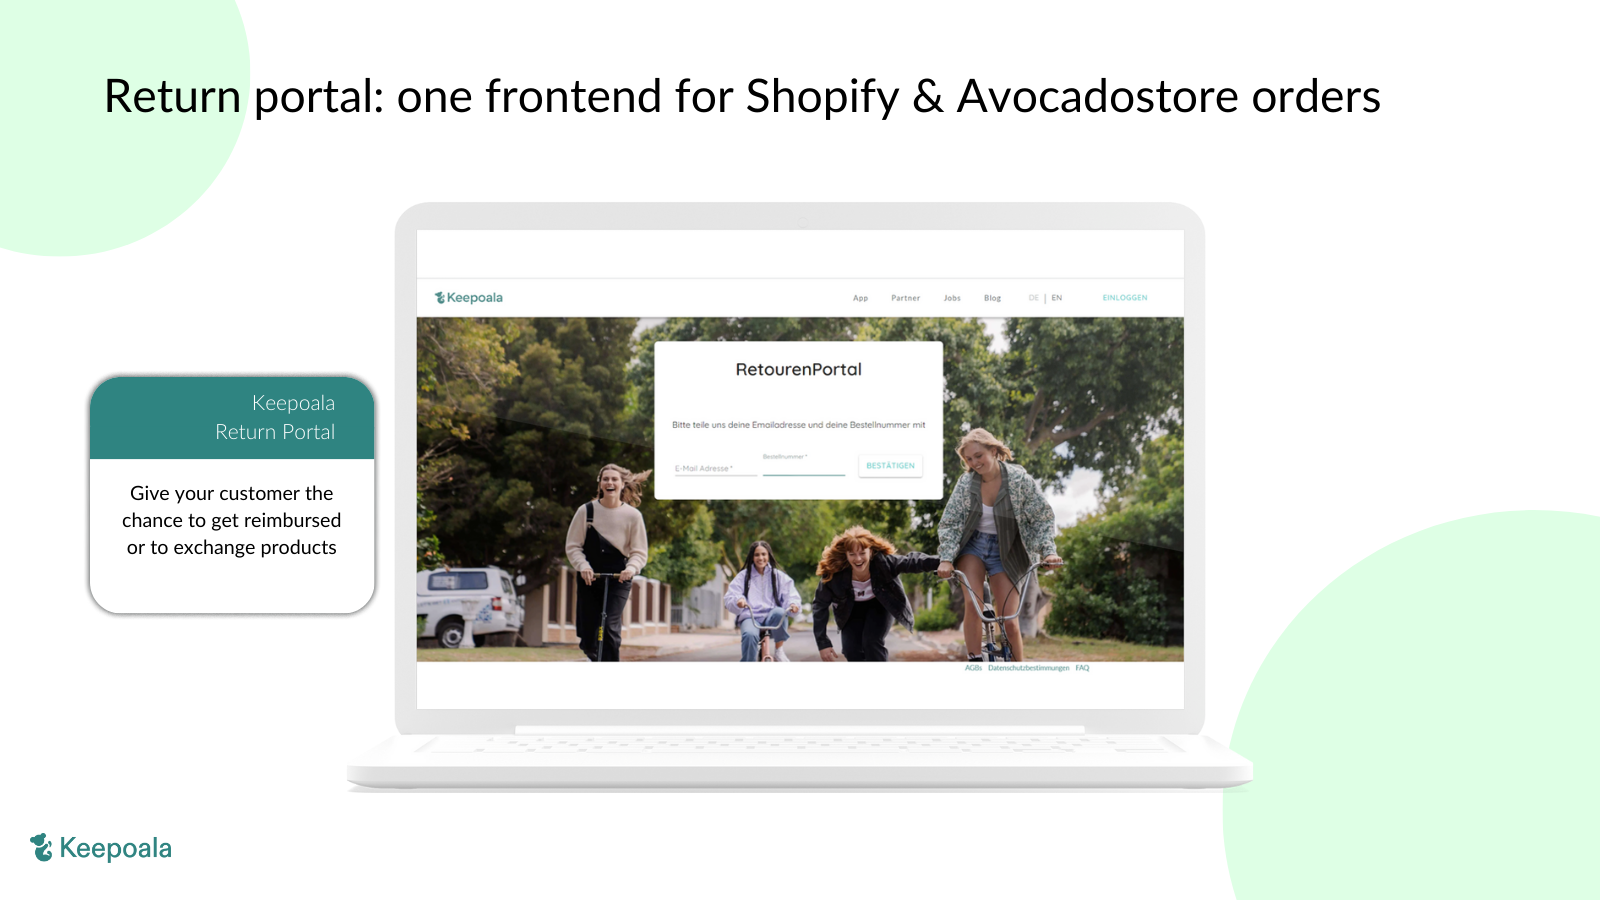 Add-on return portal: one frontend for Shopify & Avocadostore